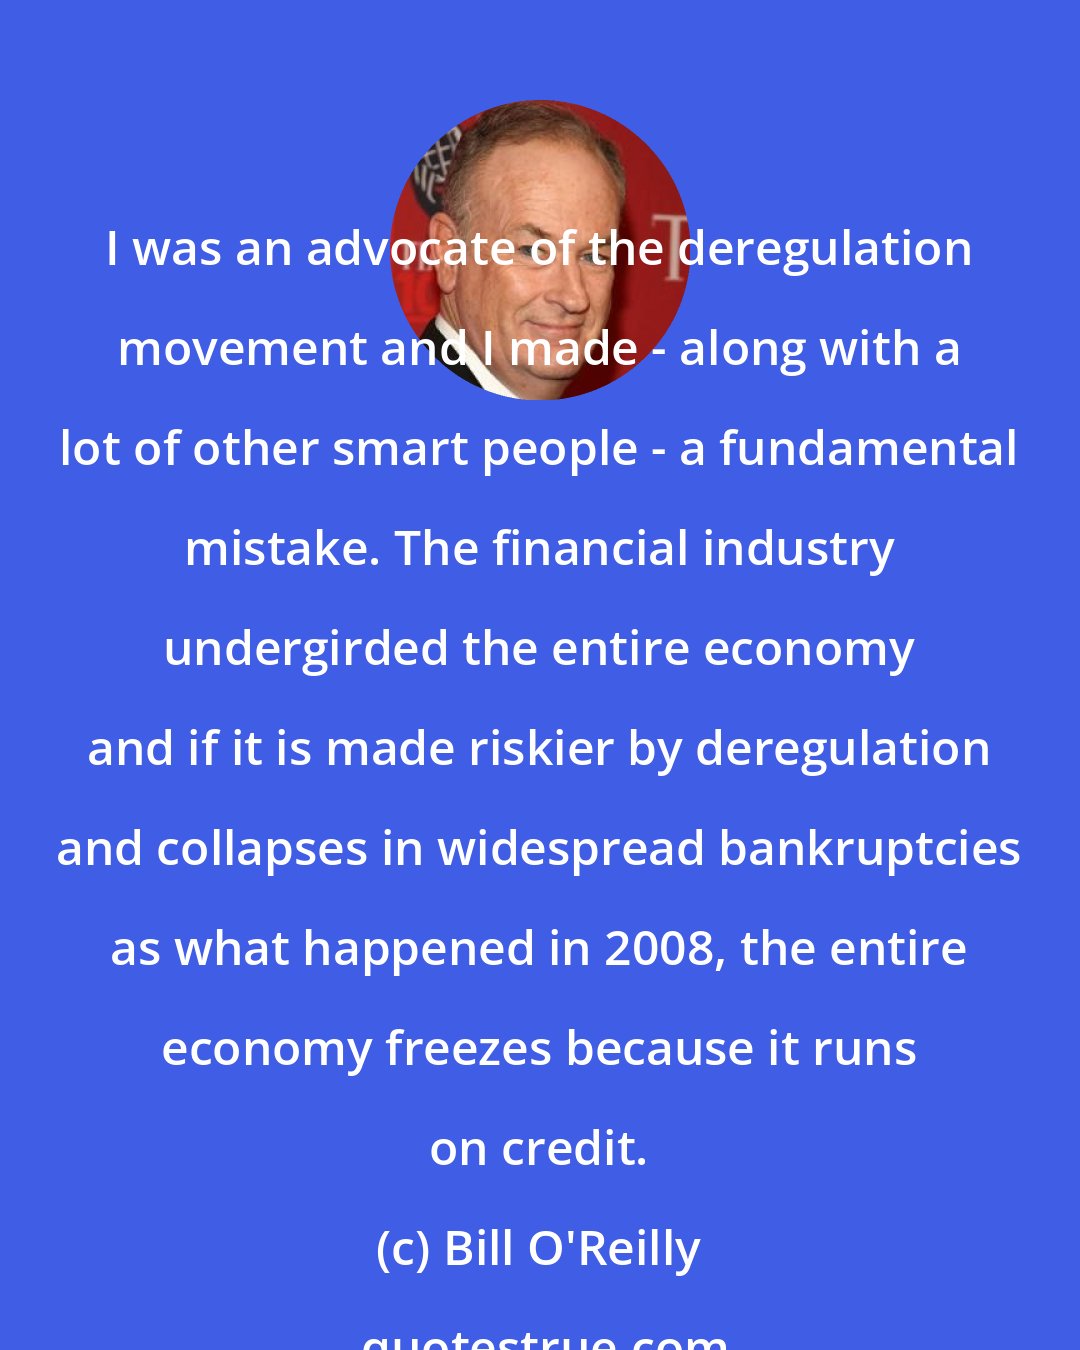 Bill O'Reilly: I was an advocate of the deregulation movement and I made - along with a lot of other smart people - a fundamental mistake. The financial industry undergirded the entire economy and if it is made riskier by deregulation and collapses in widespread bankruptcies as what happened in 2008, the entire economy freezes because it runs on credit.